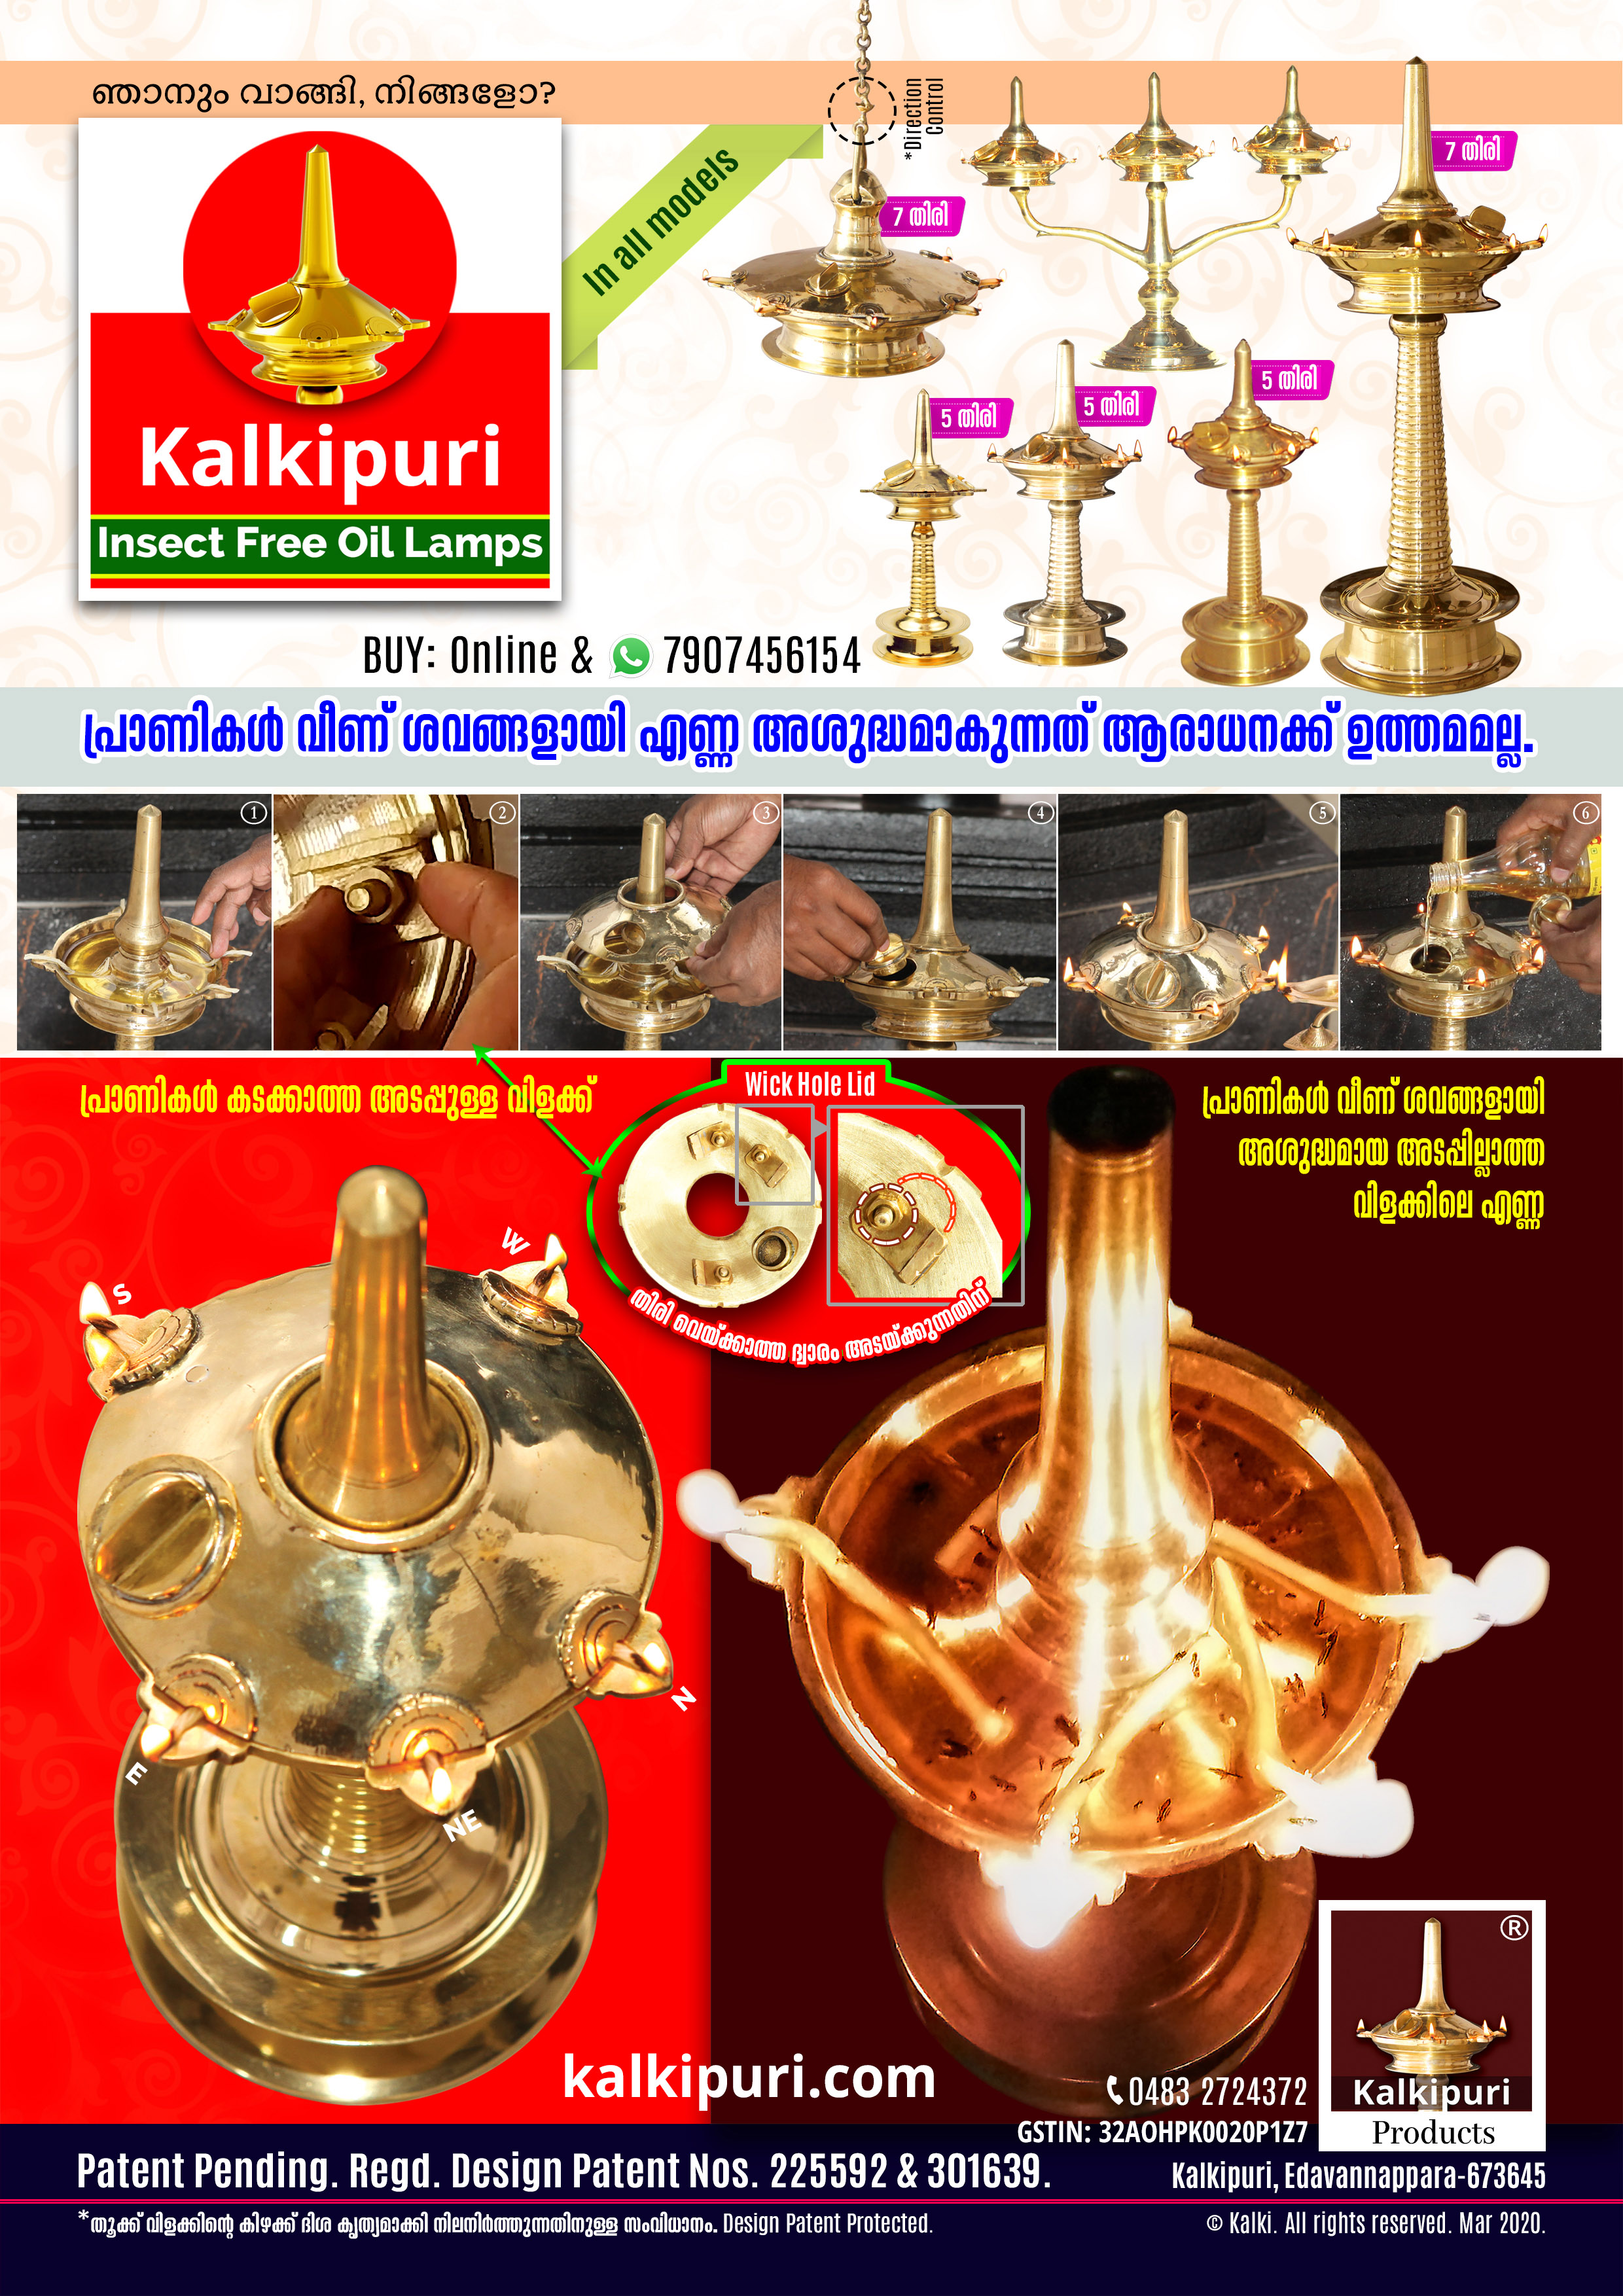 Kalkipuri Insect Free Oil Lamps-1